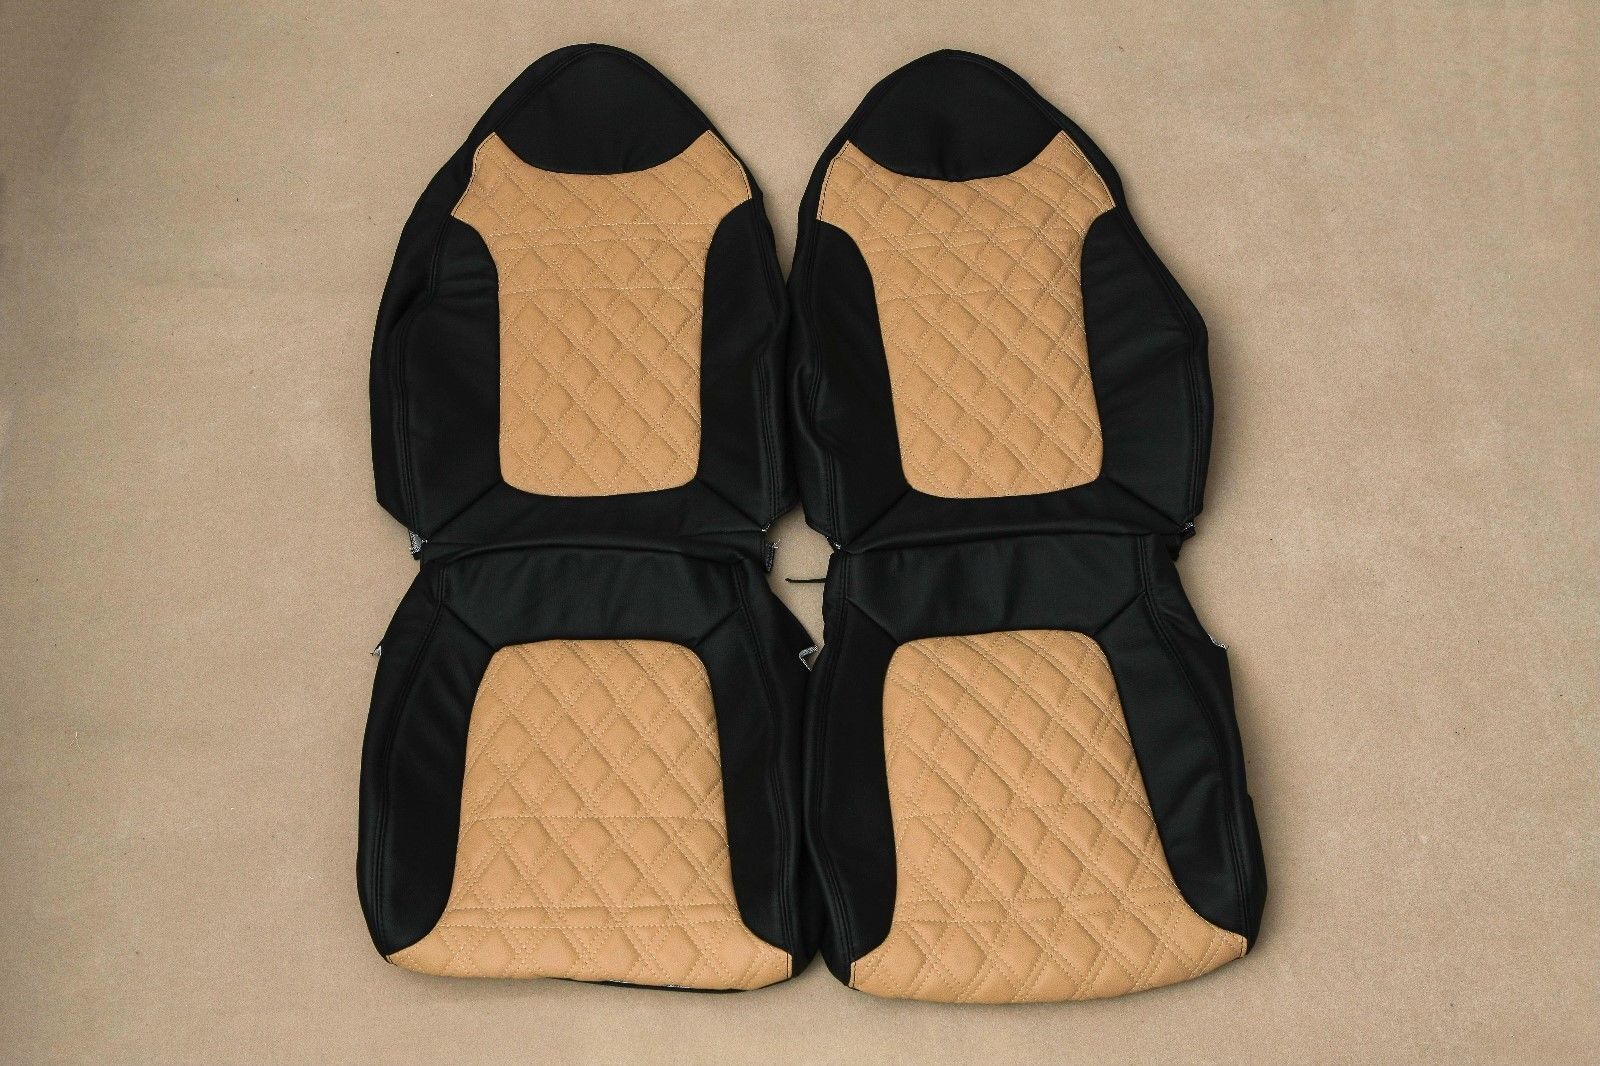 Pontiac Solstice 2006 - 2010 Real Leather Seat Covers Two Tone Custom Made